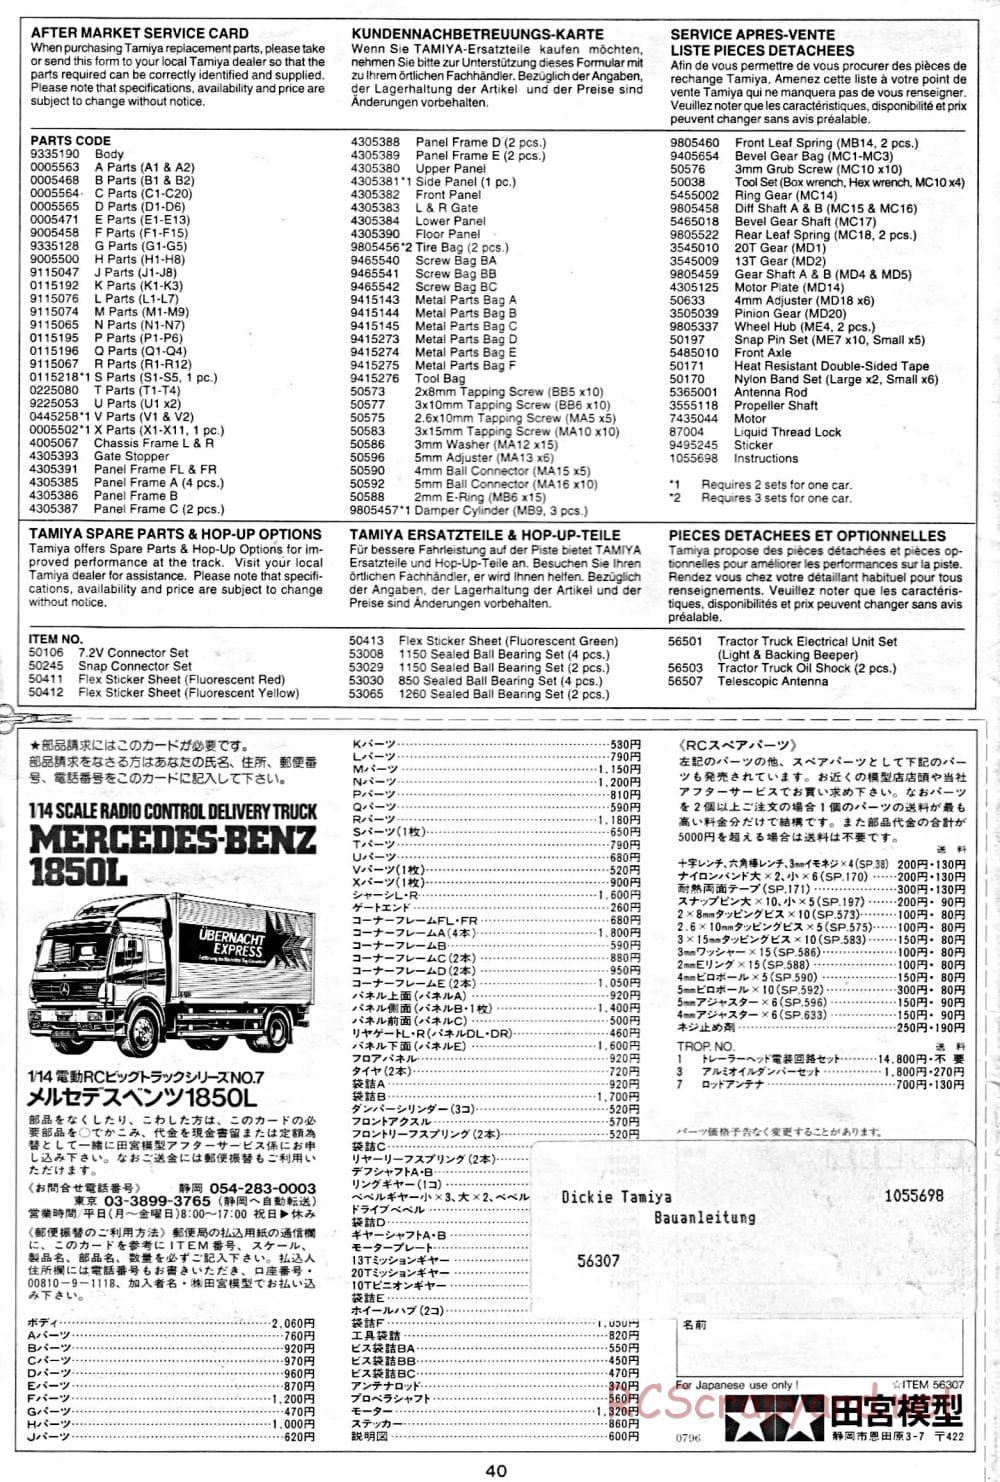 Tamiya - Mercedes-Benz 1850L Delivery Truck - Manual - Page 40